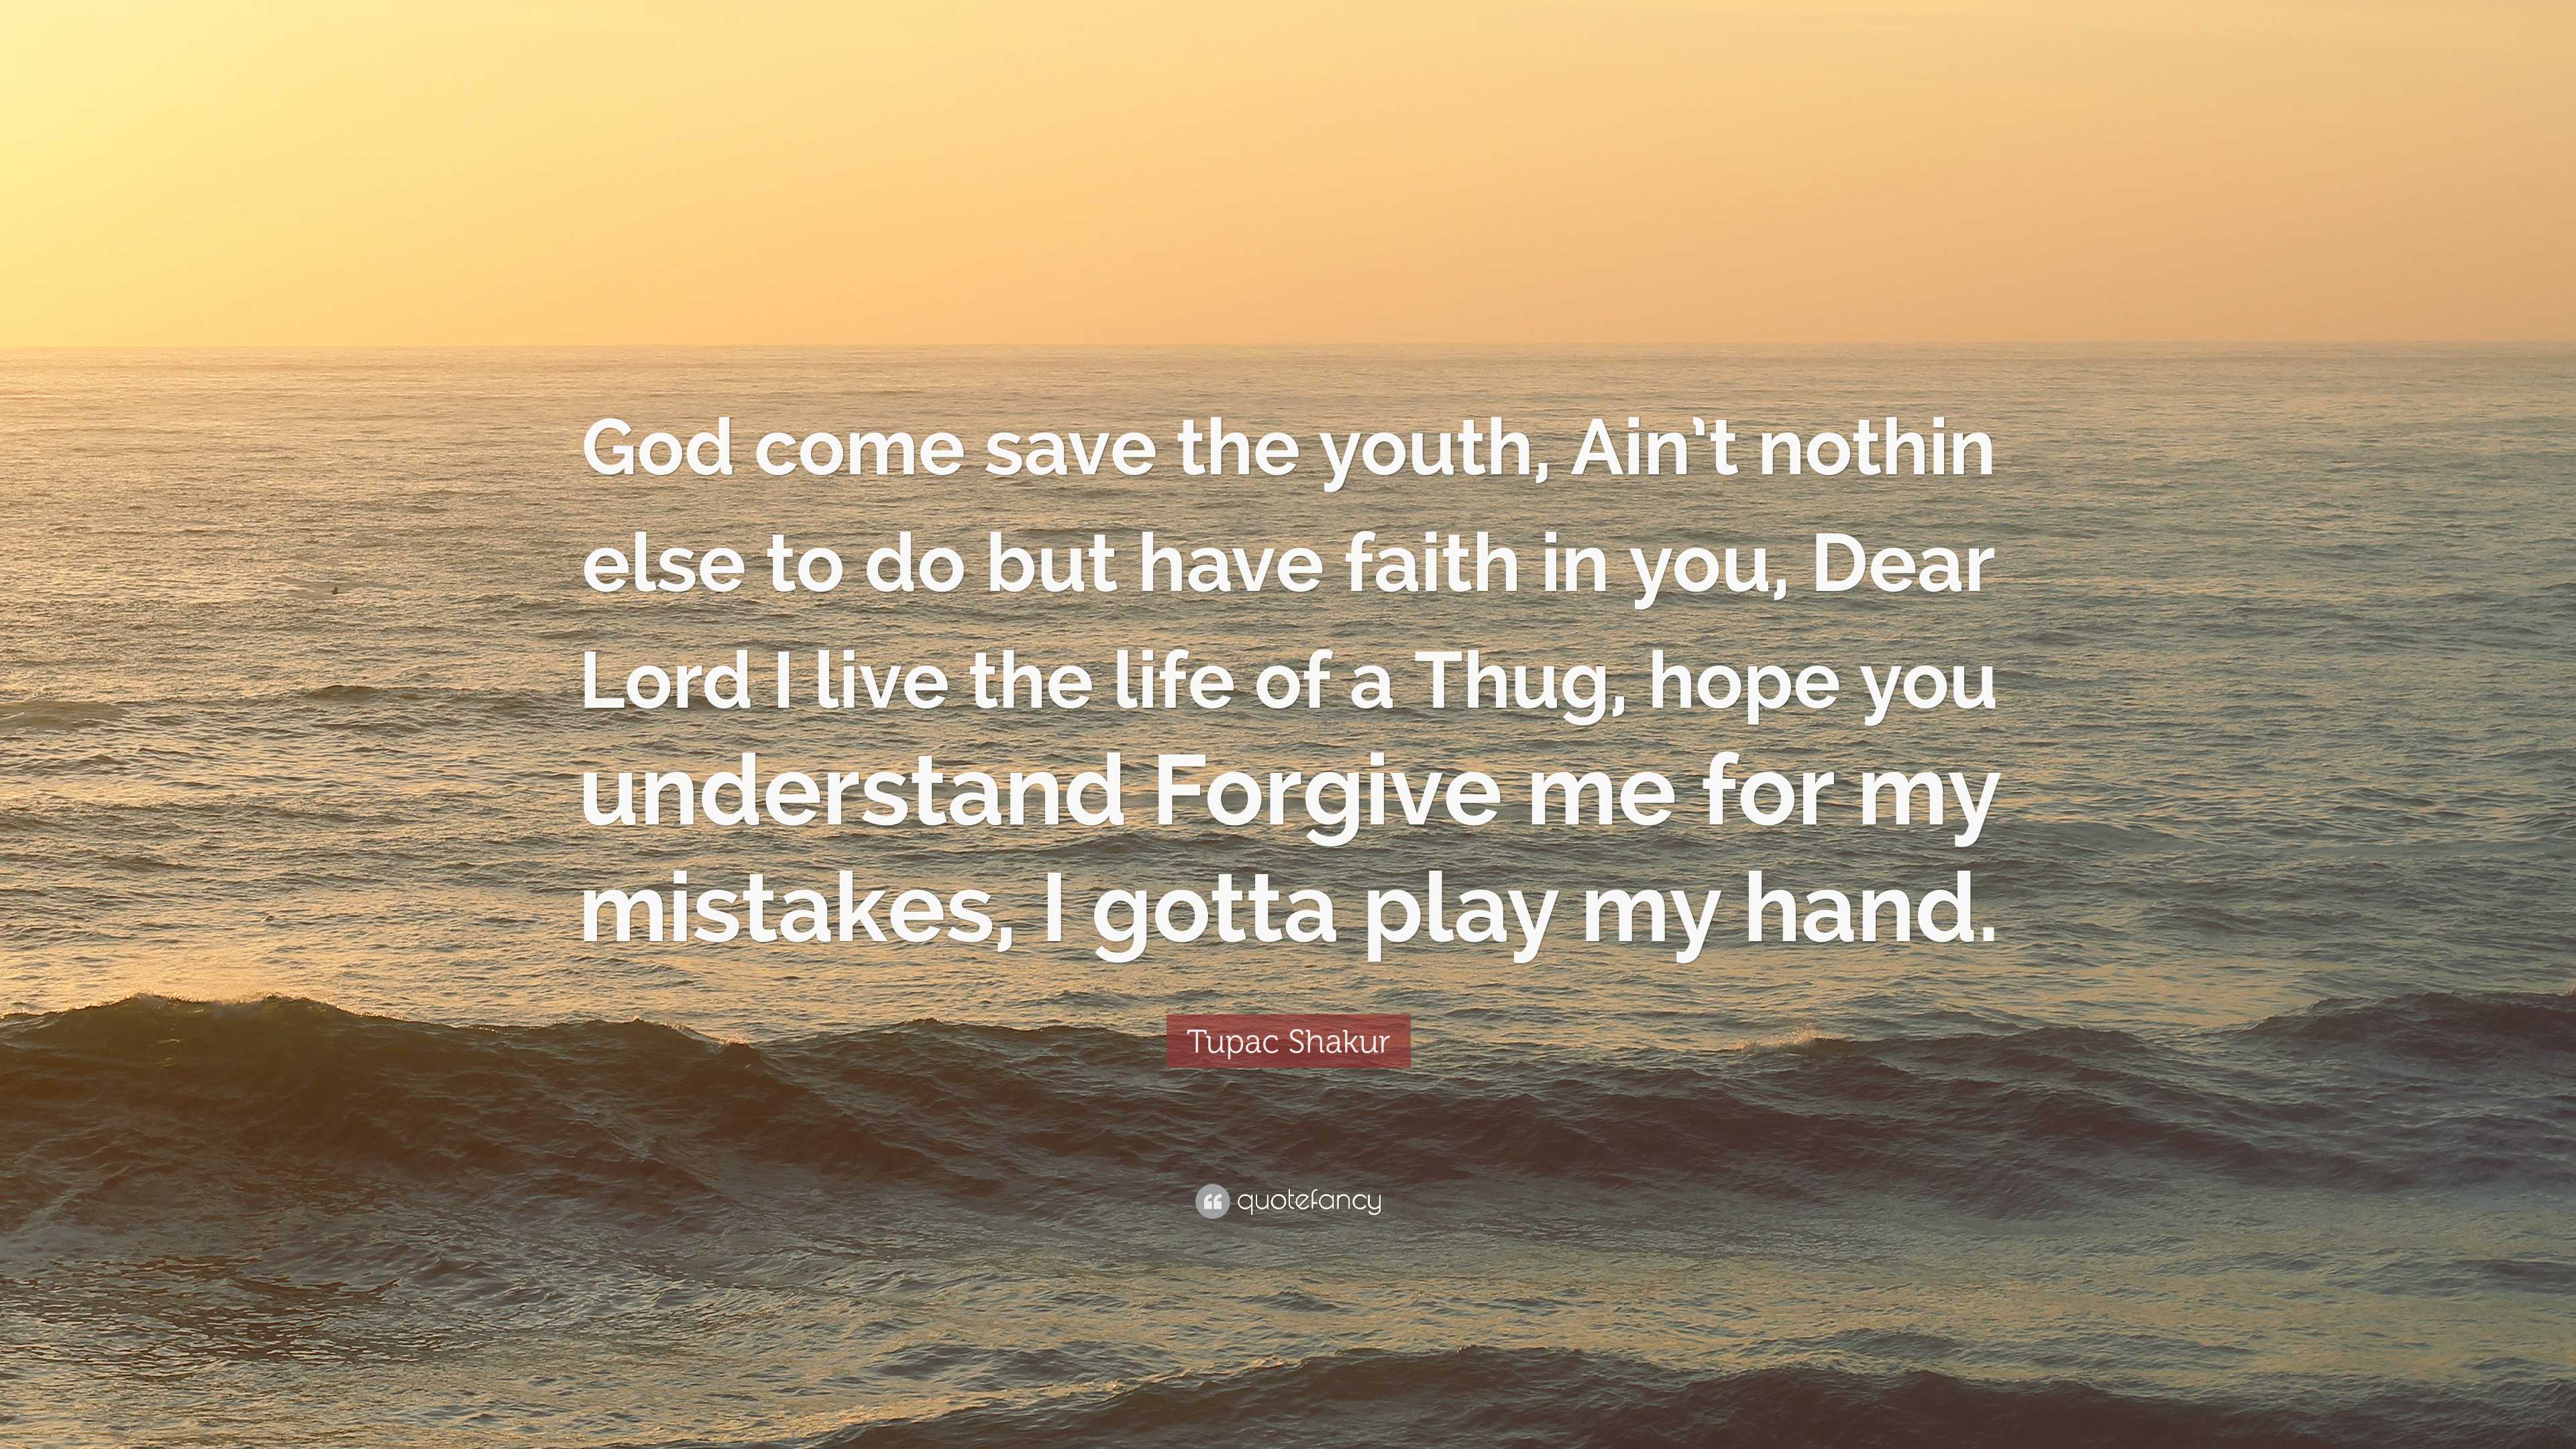 Tupac Shakur Quote: “God come save the youth, Ain't nothin else to do but  have faith in you, Dear Lord I live the life of a Thug, hope you un”